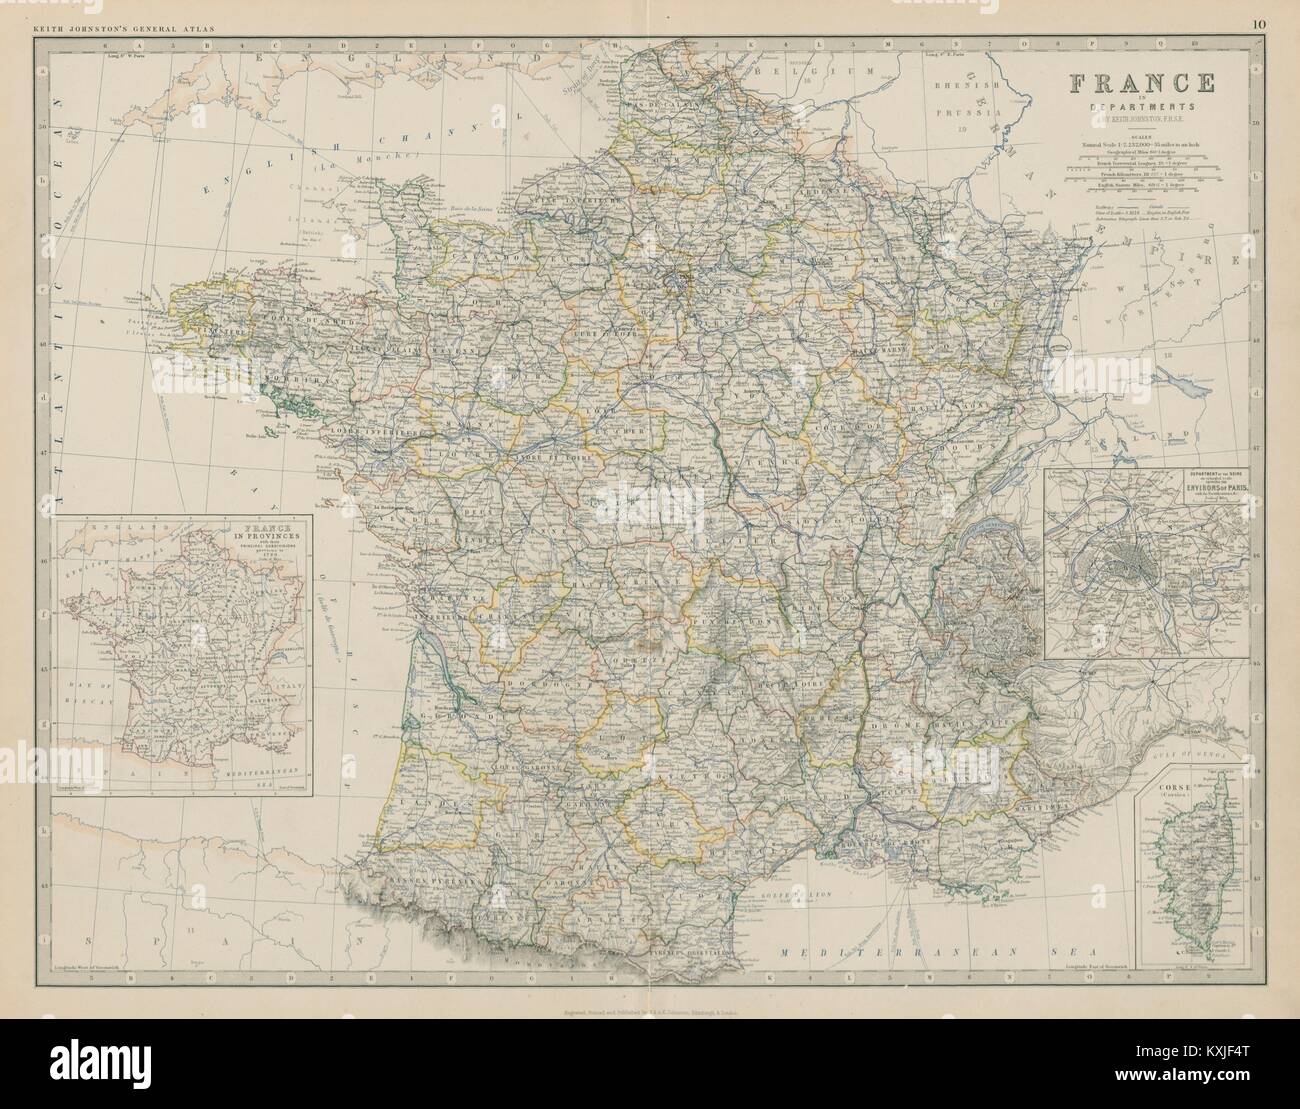 France in Departments. Departements. Large 50x60cm. JOHNSTON 1879 old map Stock Photo